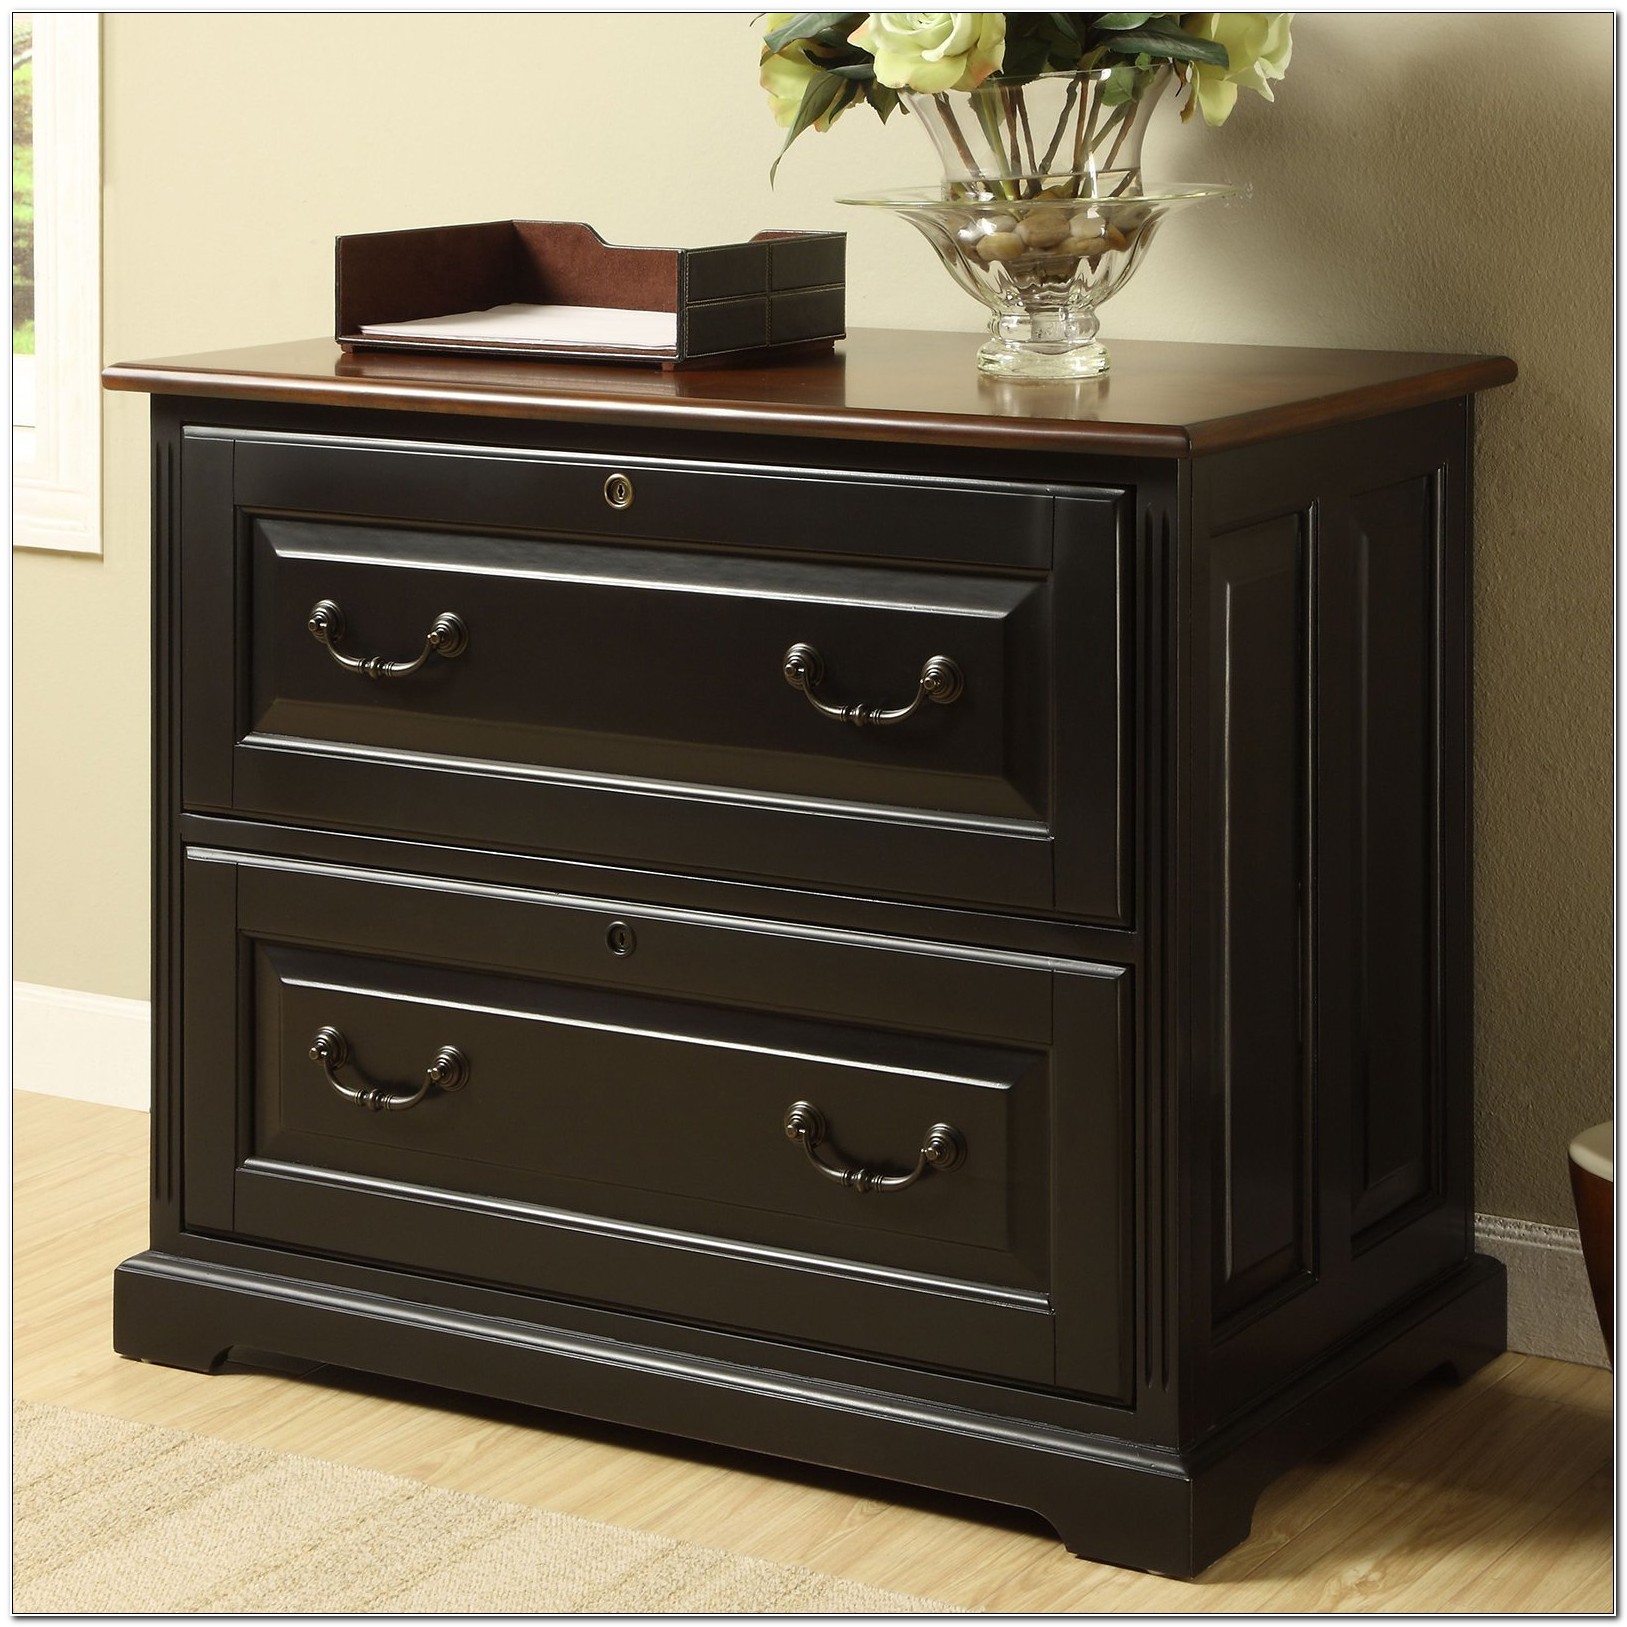 2 Drawer Lateral File Black Wood Home Design Ideas